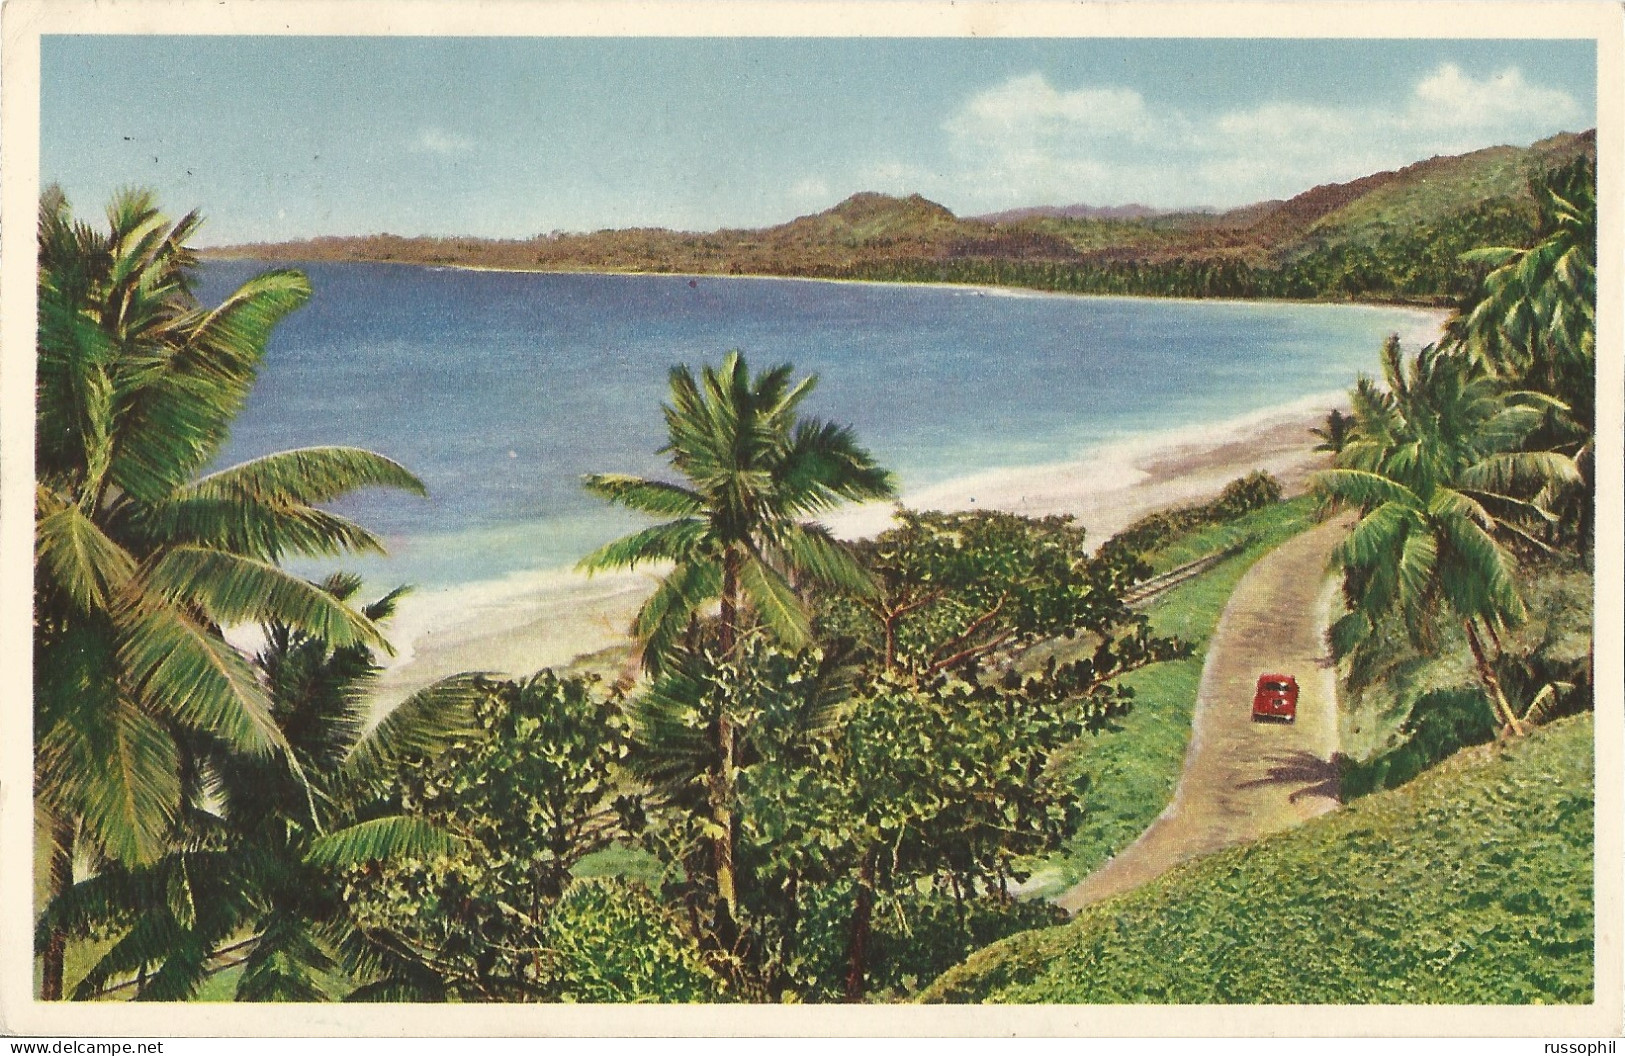 JAMAICA - TYPICAL OF JAMAICA'S COASTAL SCENERY. THIS STRETCH LIES BETWEEN ANNOTTO BAY AND KINGSTON  - 1953 - Jamaica